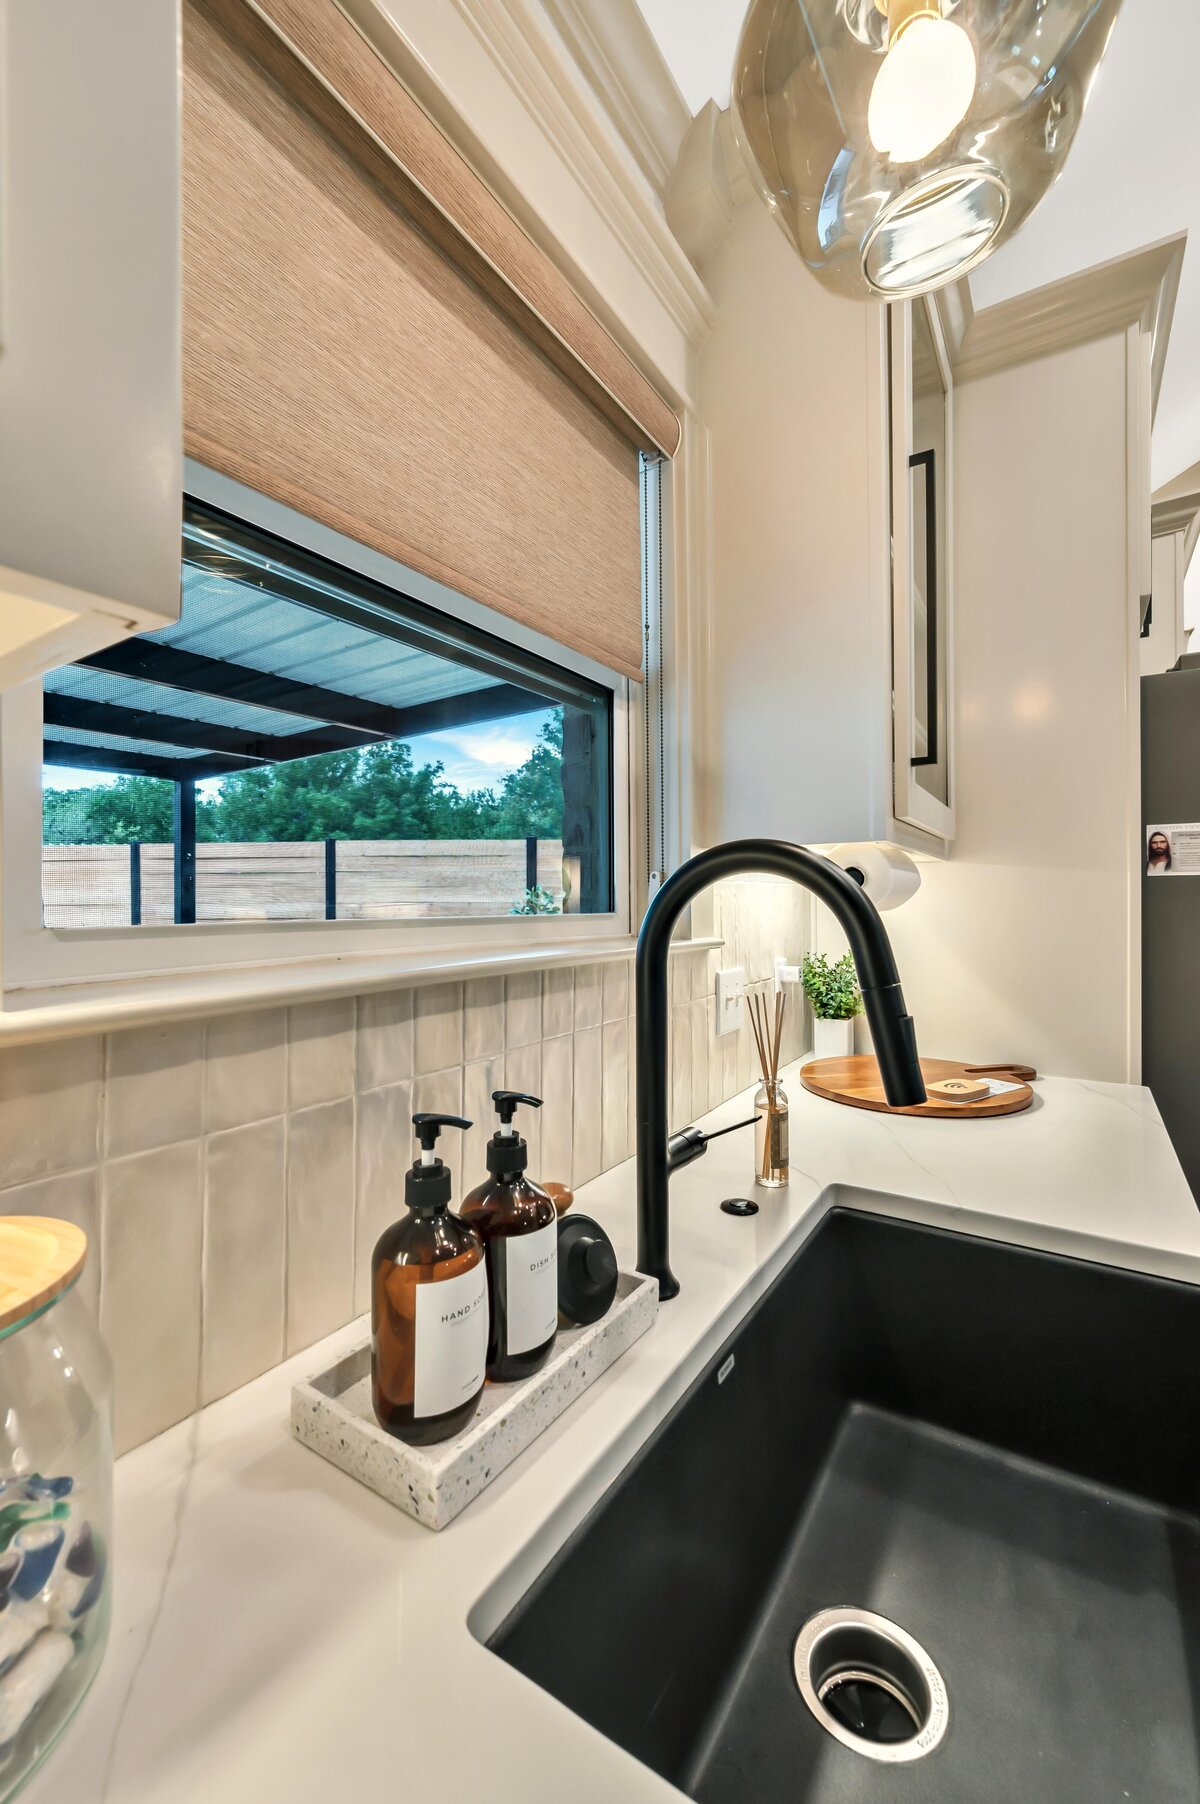 Large kitchen sink with window overlooking the backyard in this three-bedroom, three-bathroom vacation rental home with free wifi, outdoor theater, hot tub, propane grill and private yard in Waco, TX.